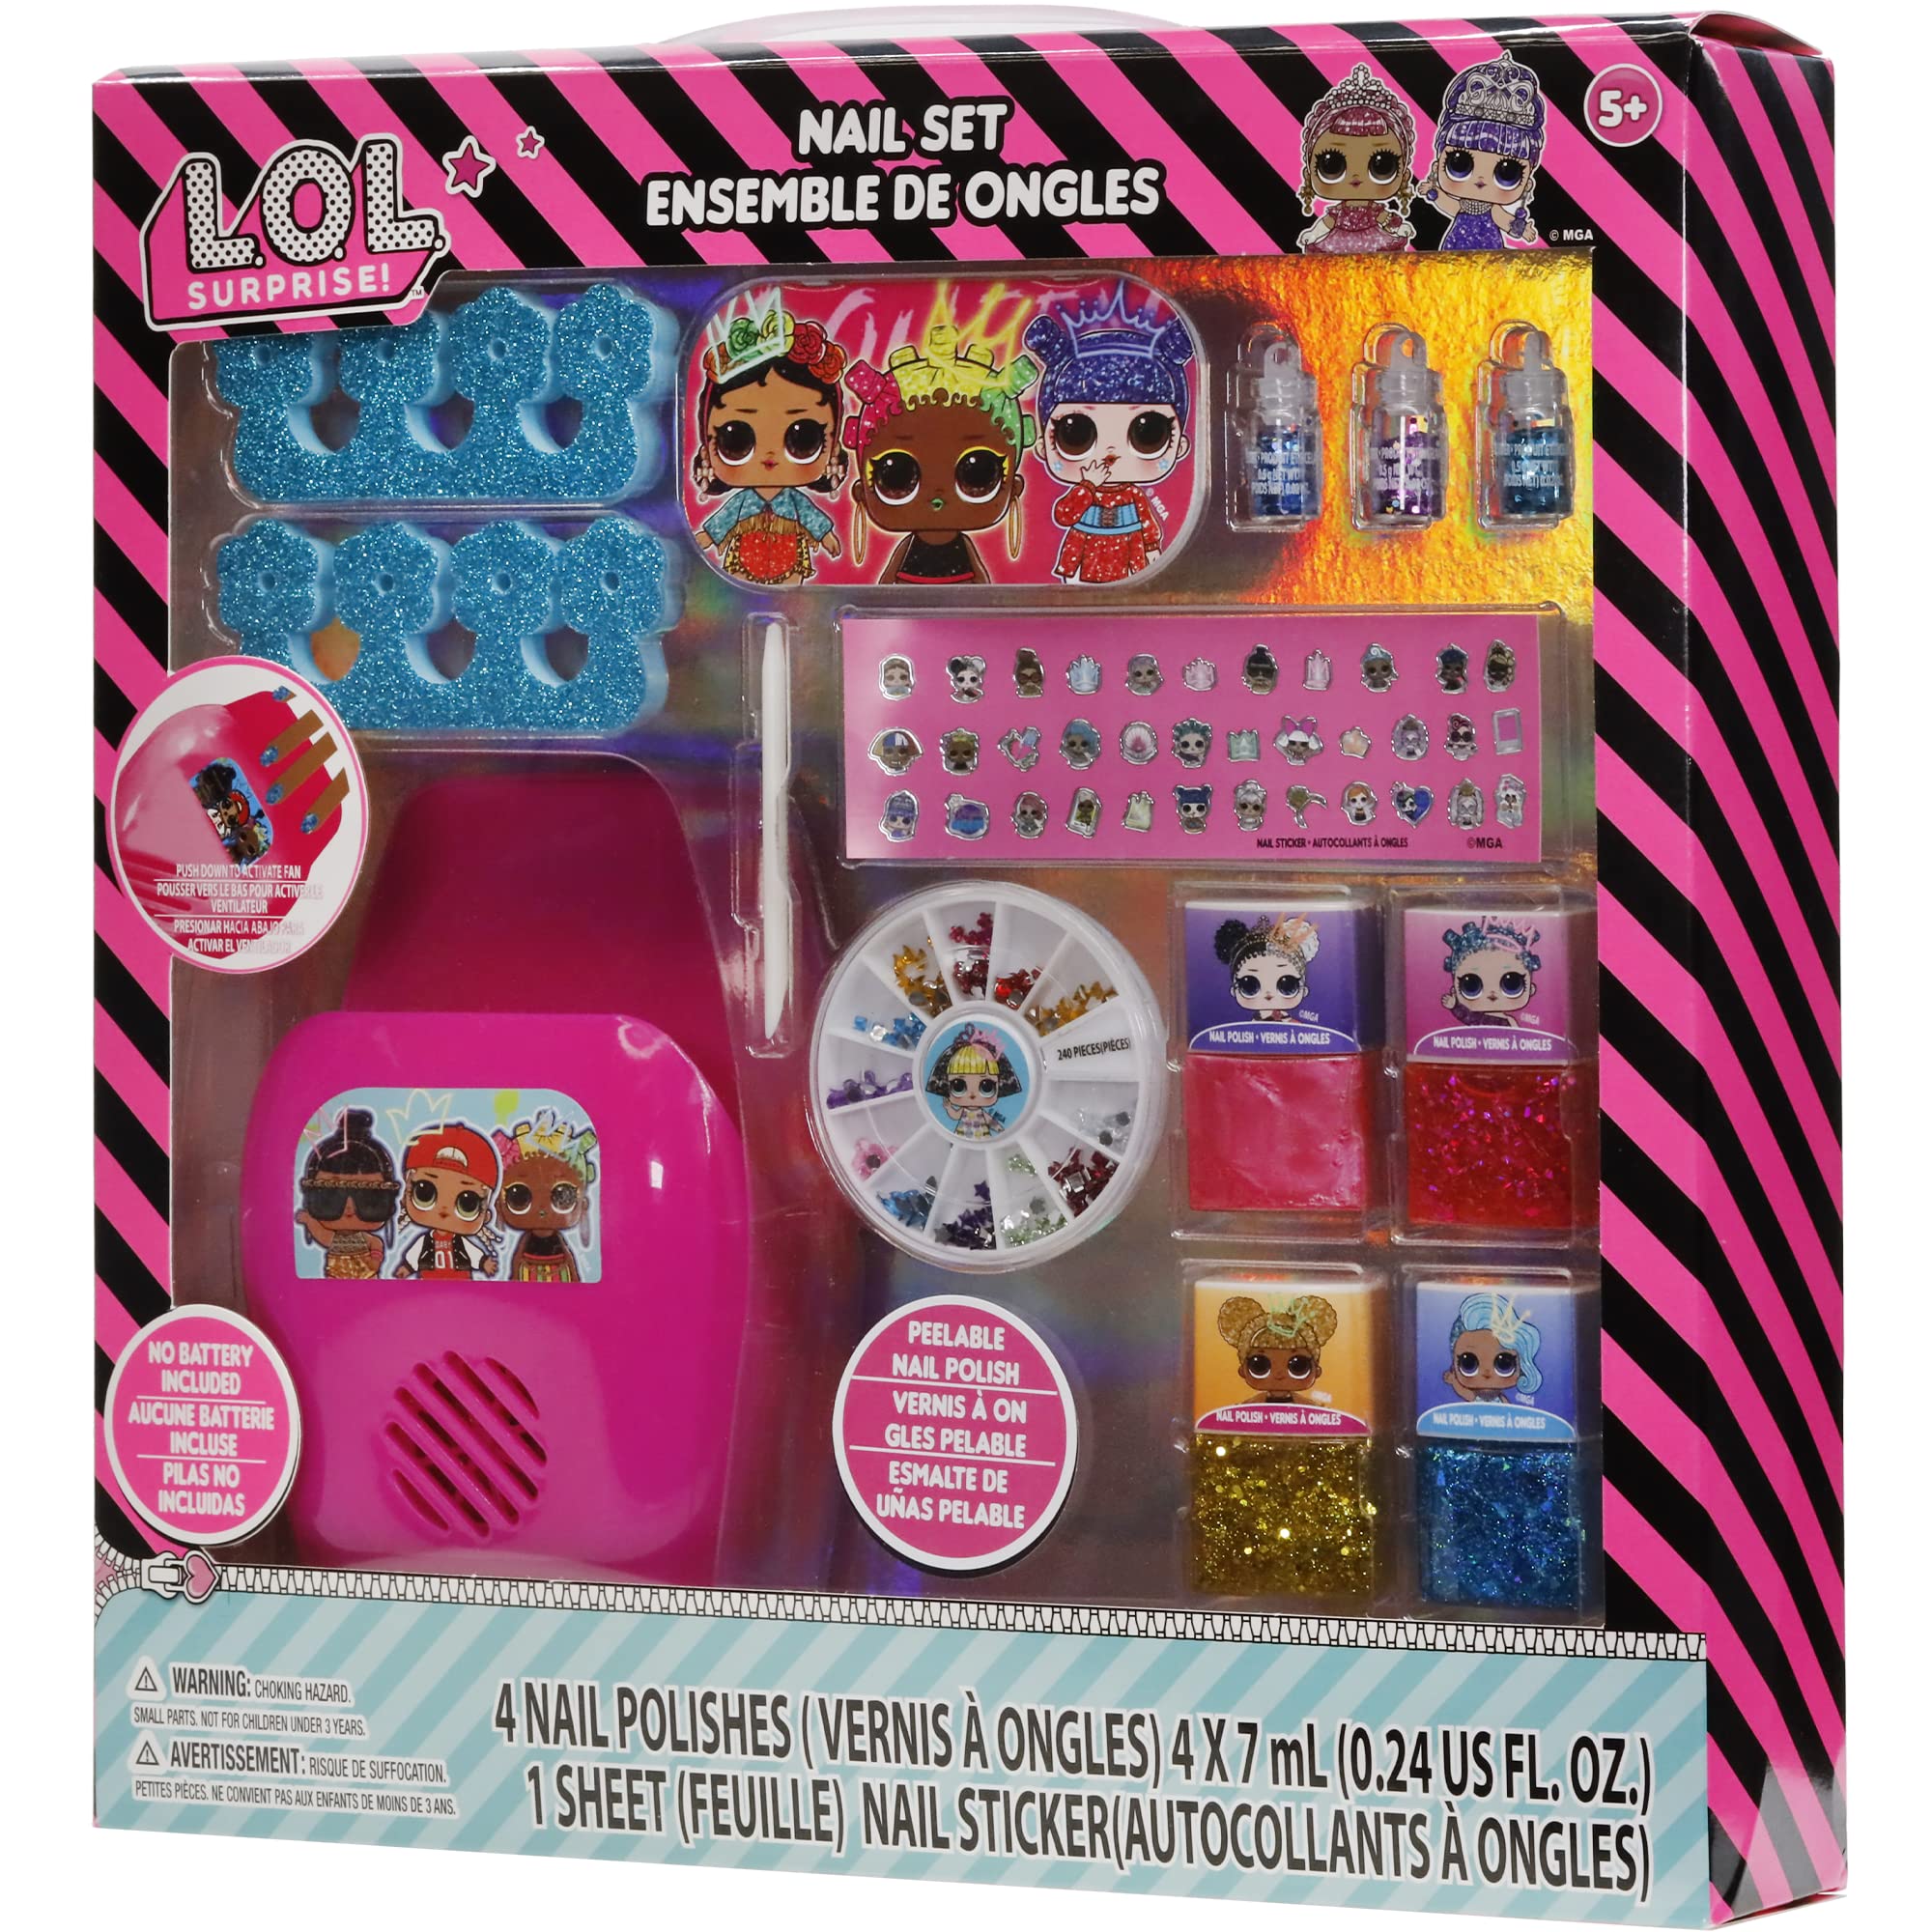 Toys League Small Nail Art Kit For Girls (set Of 3)